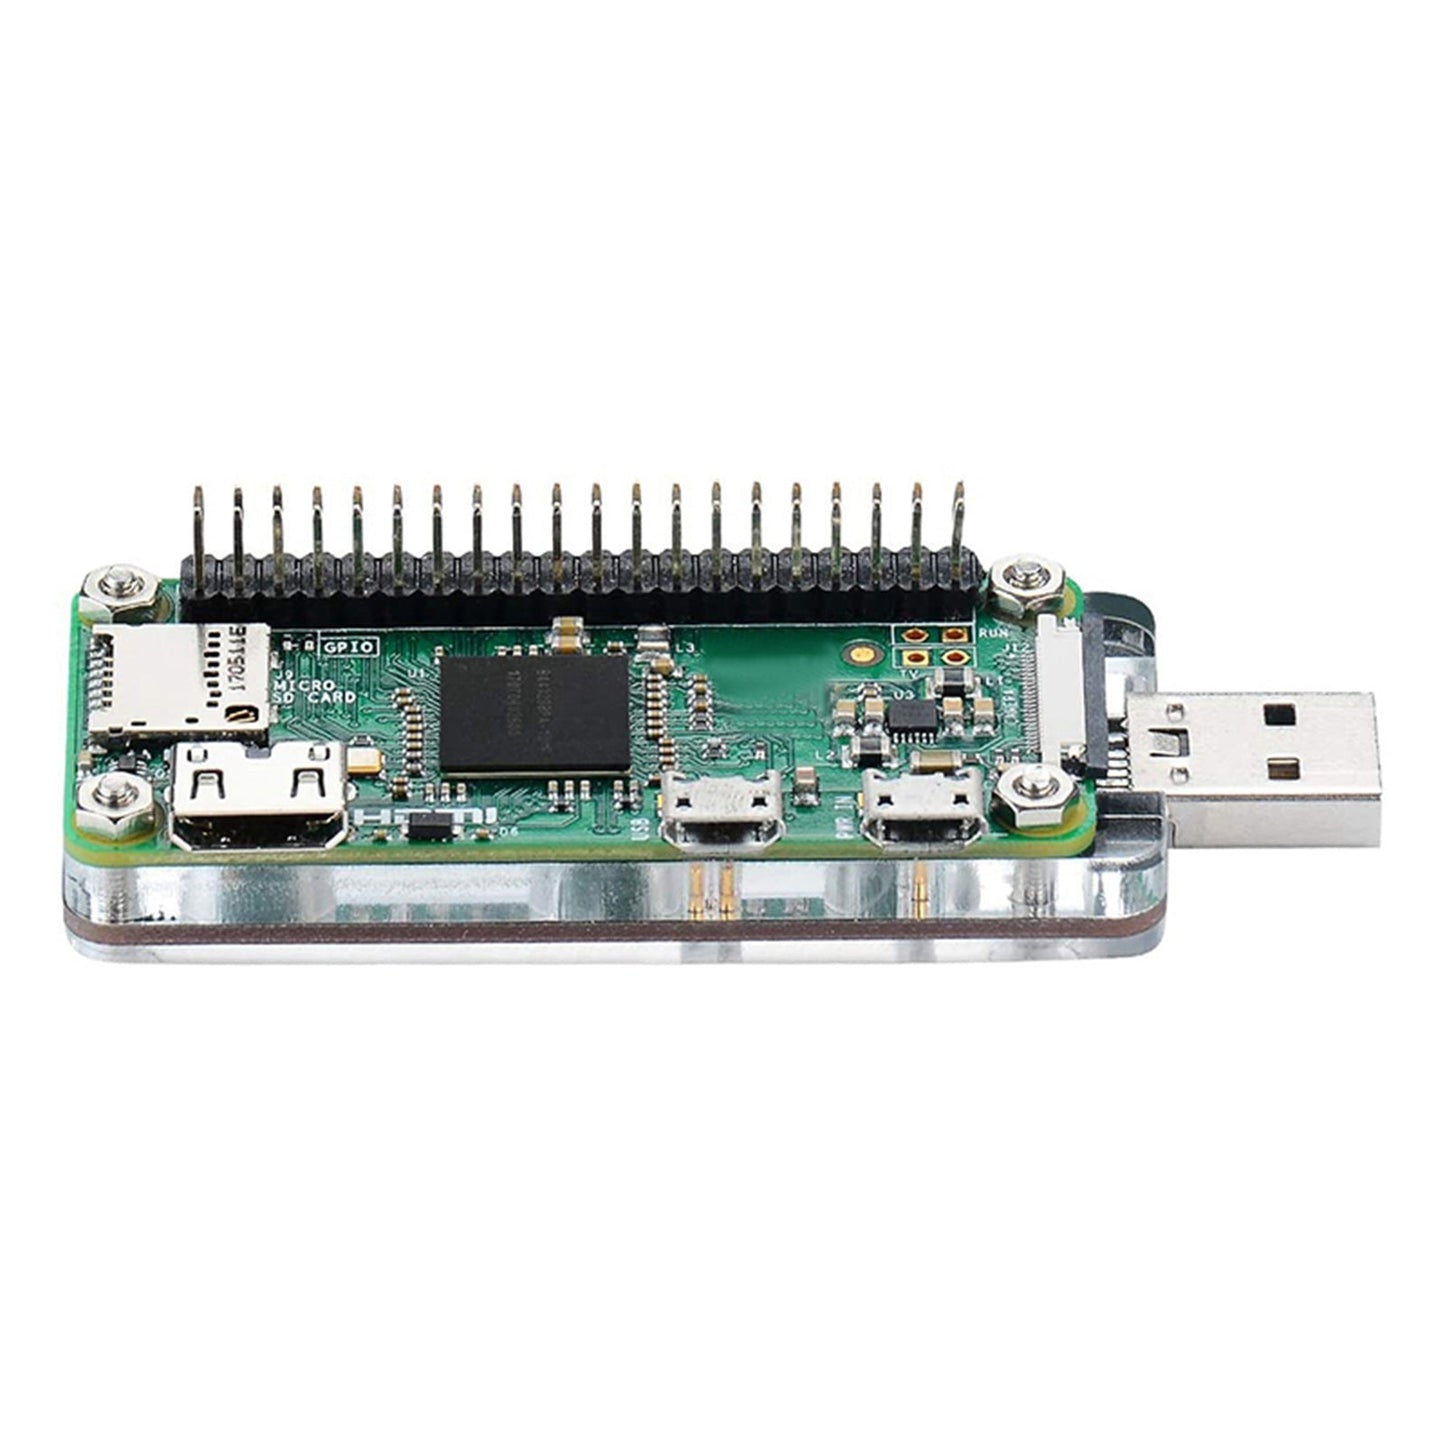 Expansion Board USB Dongle Module Connector for Raspberry Pi Zero / W / WHE